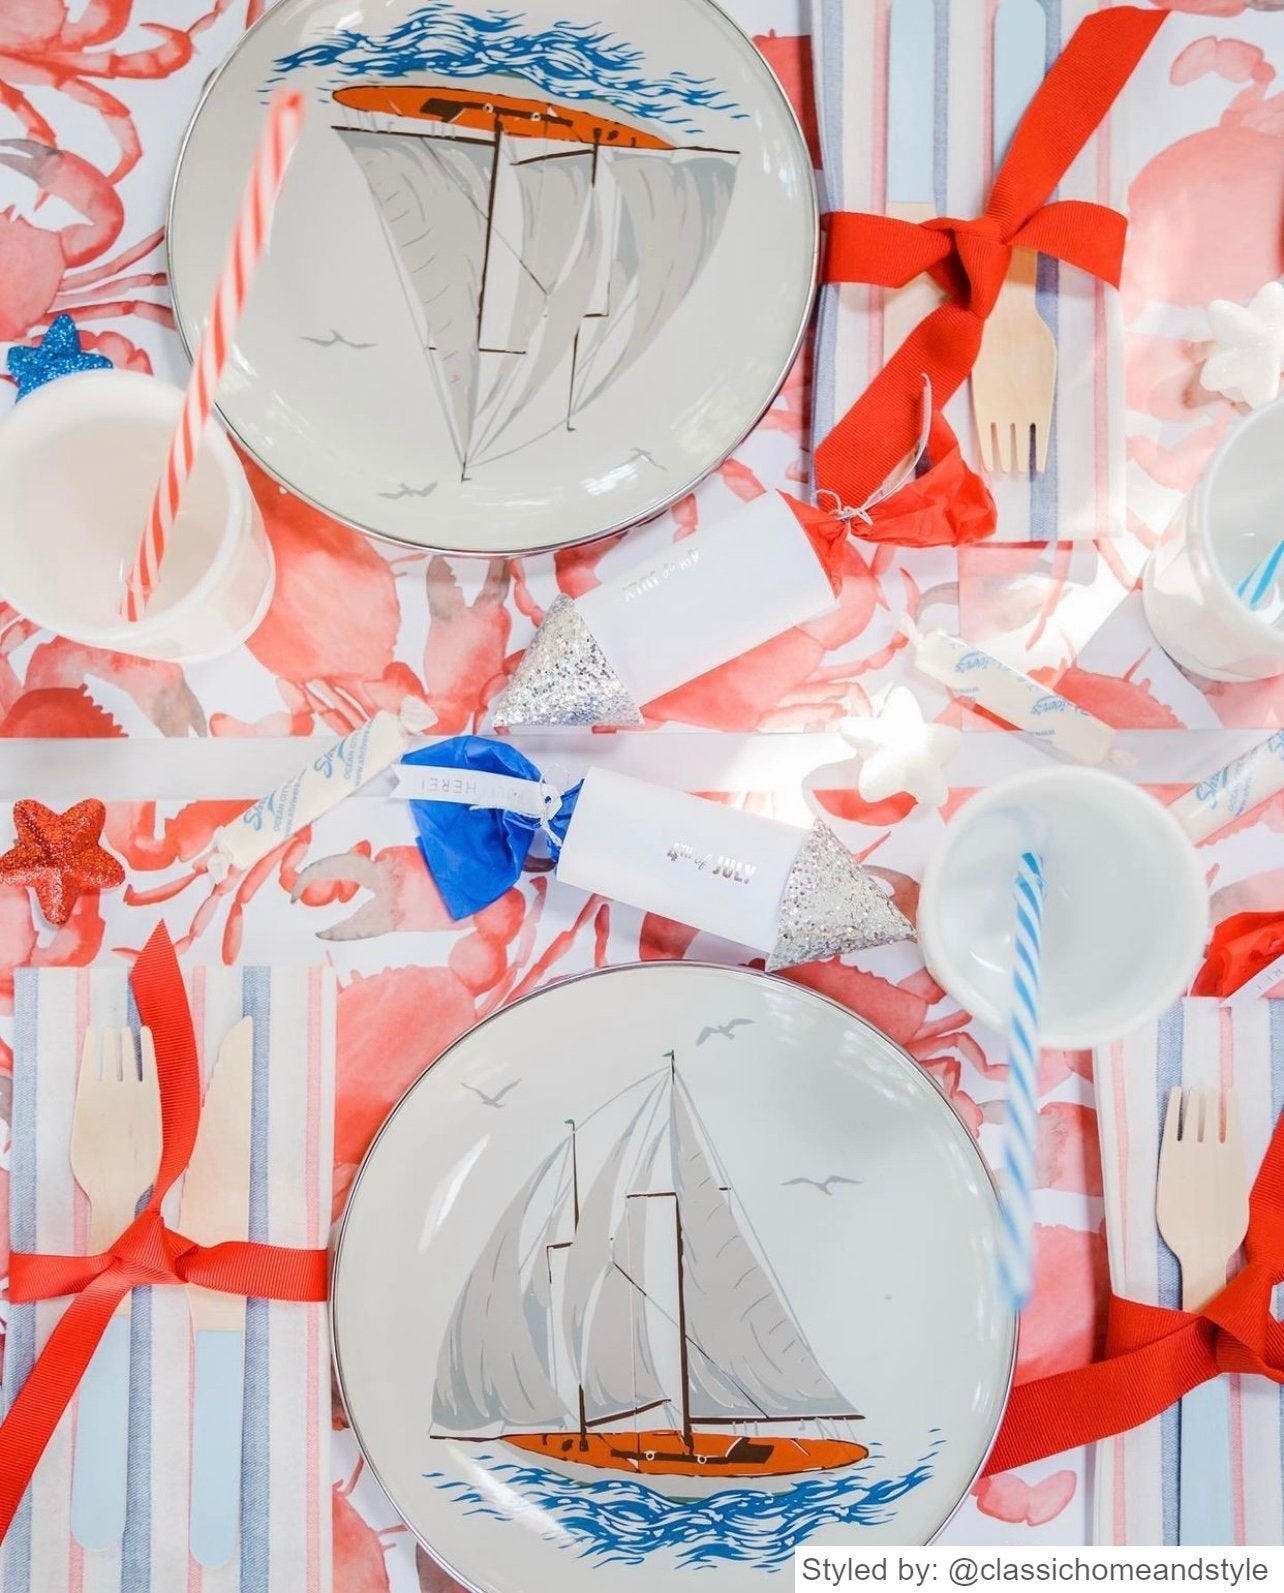 Red, white and blue table setting with red and white crab paper placemats and a blue andw whitesailboat plate